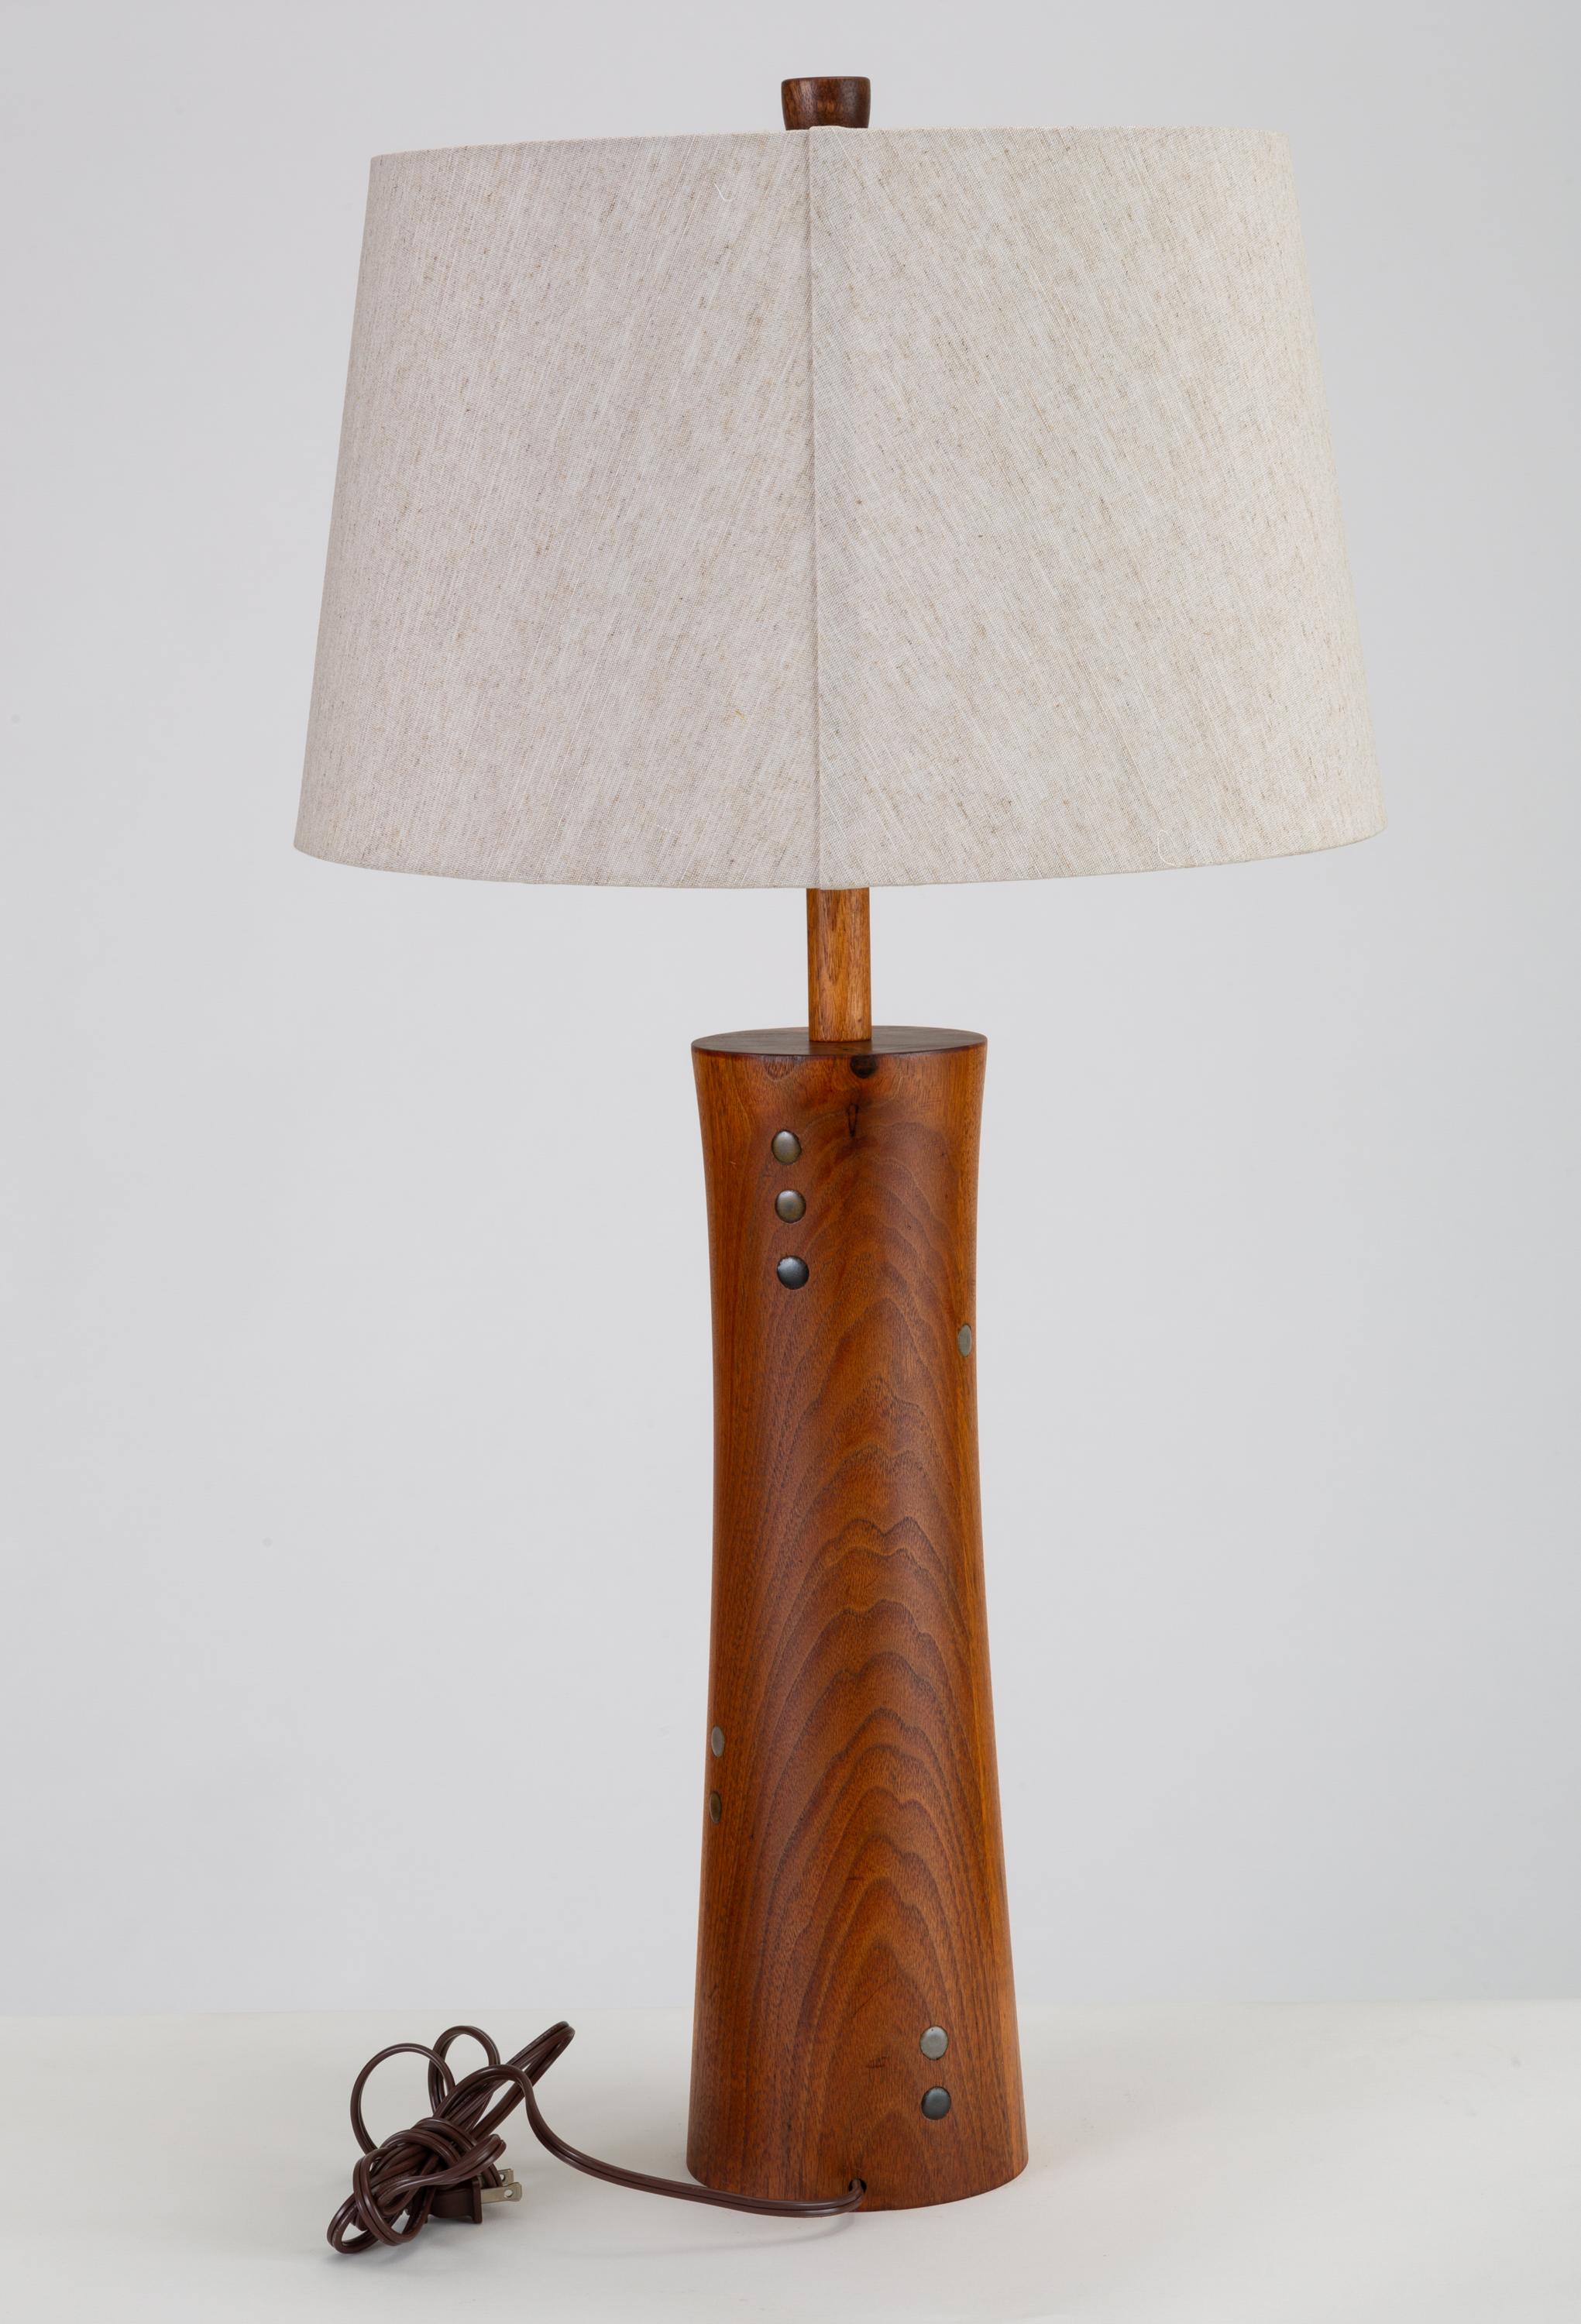 Mid-Century Modern Wooden Table Lamp with Tile Inlay by Gordon & Jane Martz